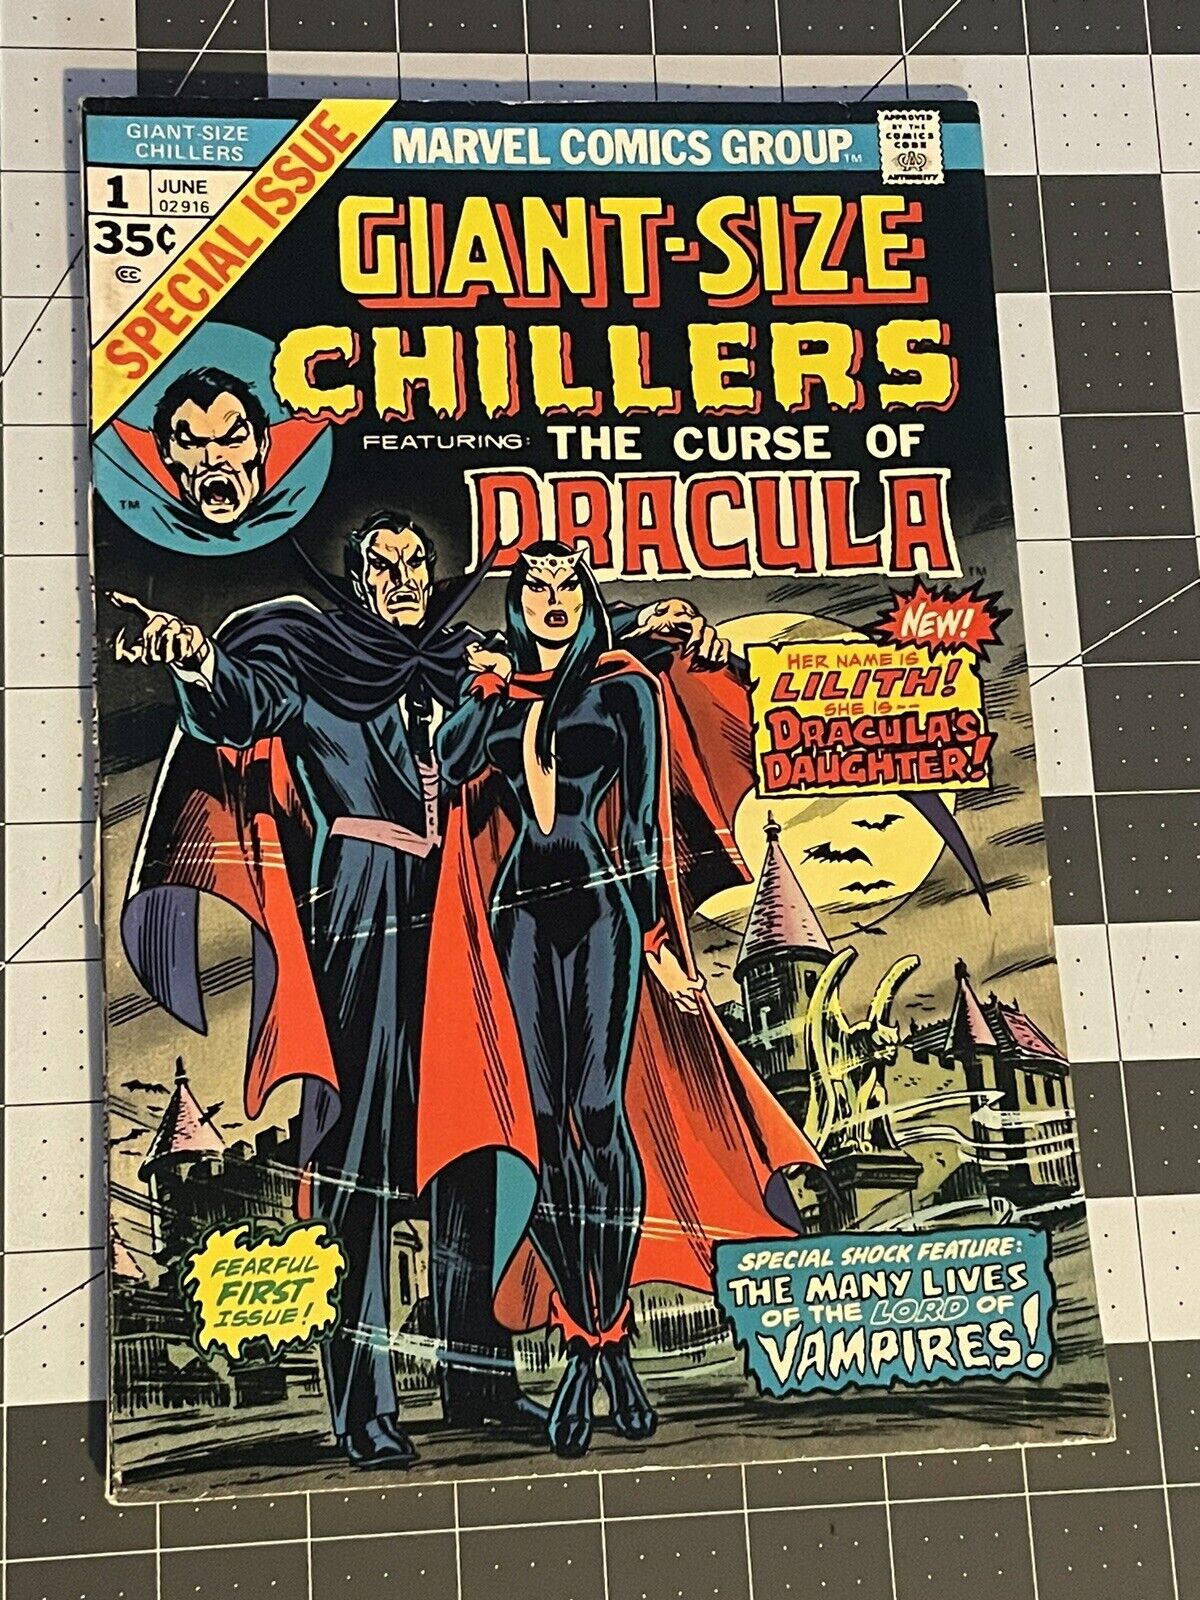 Giant-Size Chillers Special # 1 - 1st Lilith (daughter of Dracula).